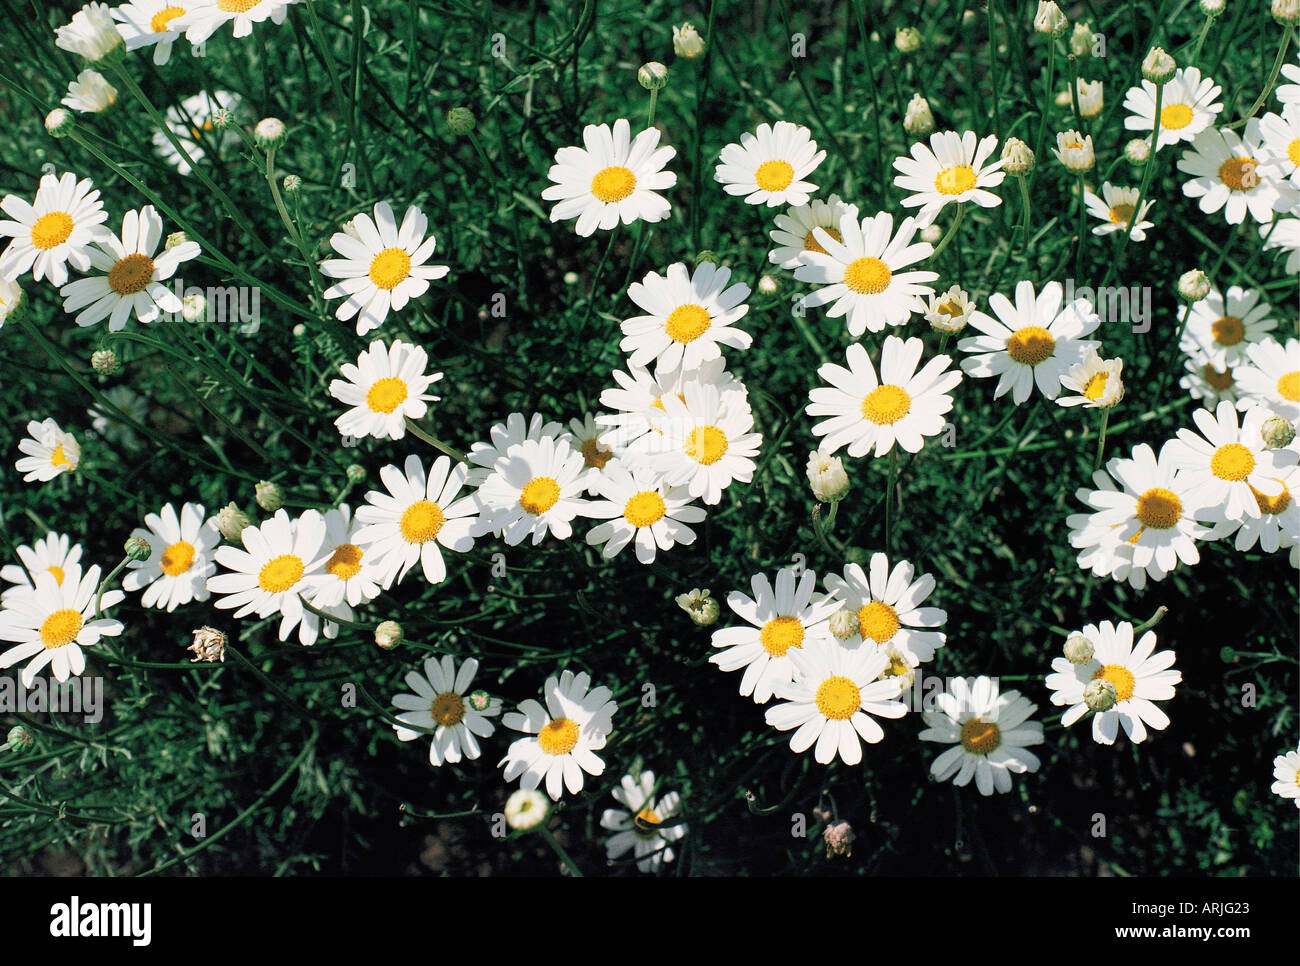 Pyrethrum daisies grown for insecticide production near Limuru Kenya East Africa Stock Photo